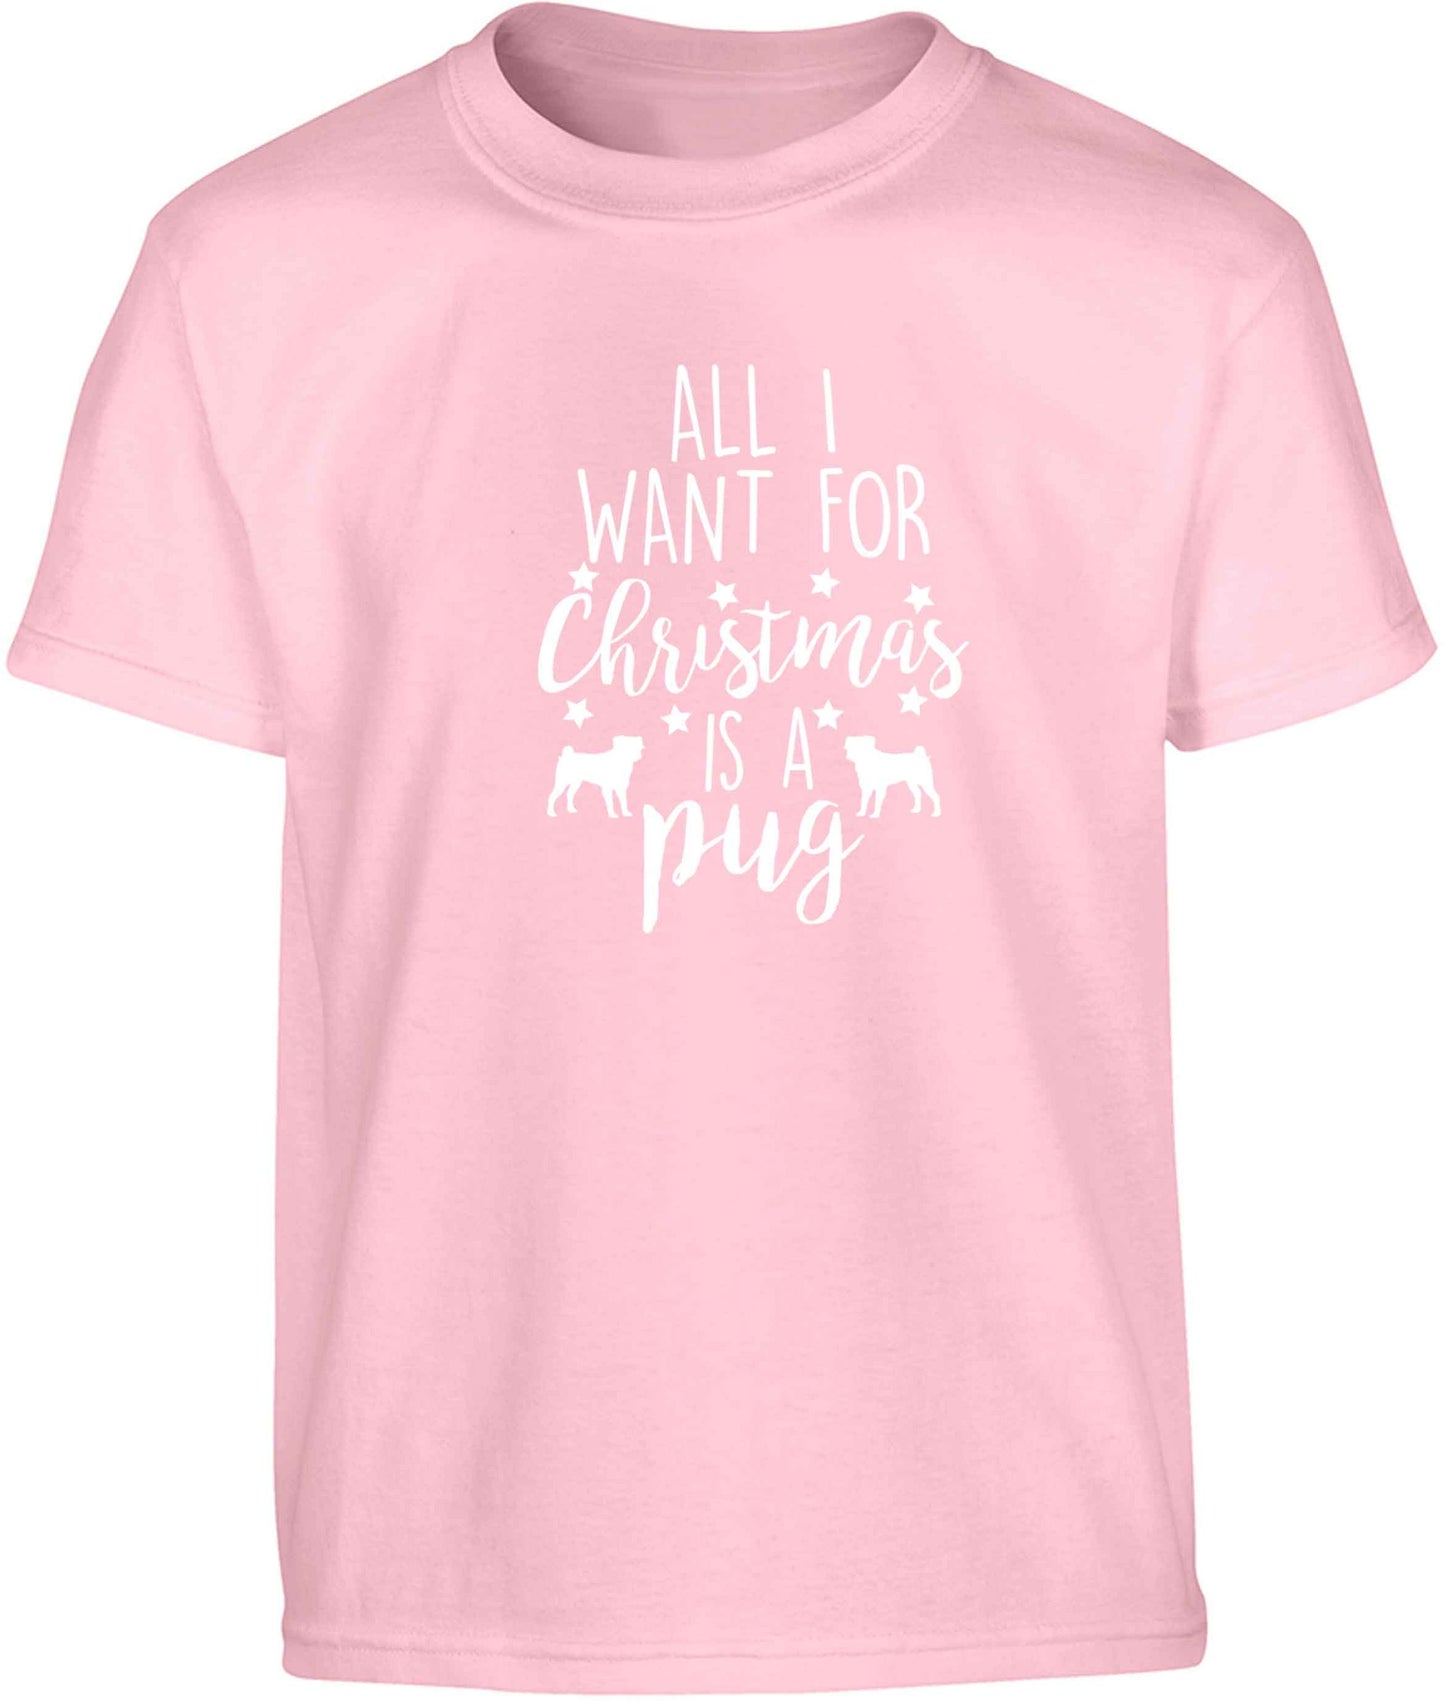 All I want for Christmas is a pug Children's light pink Tshirt 12-13 Years